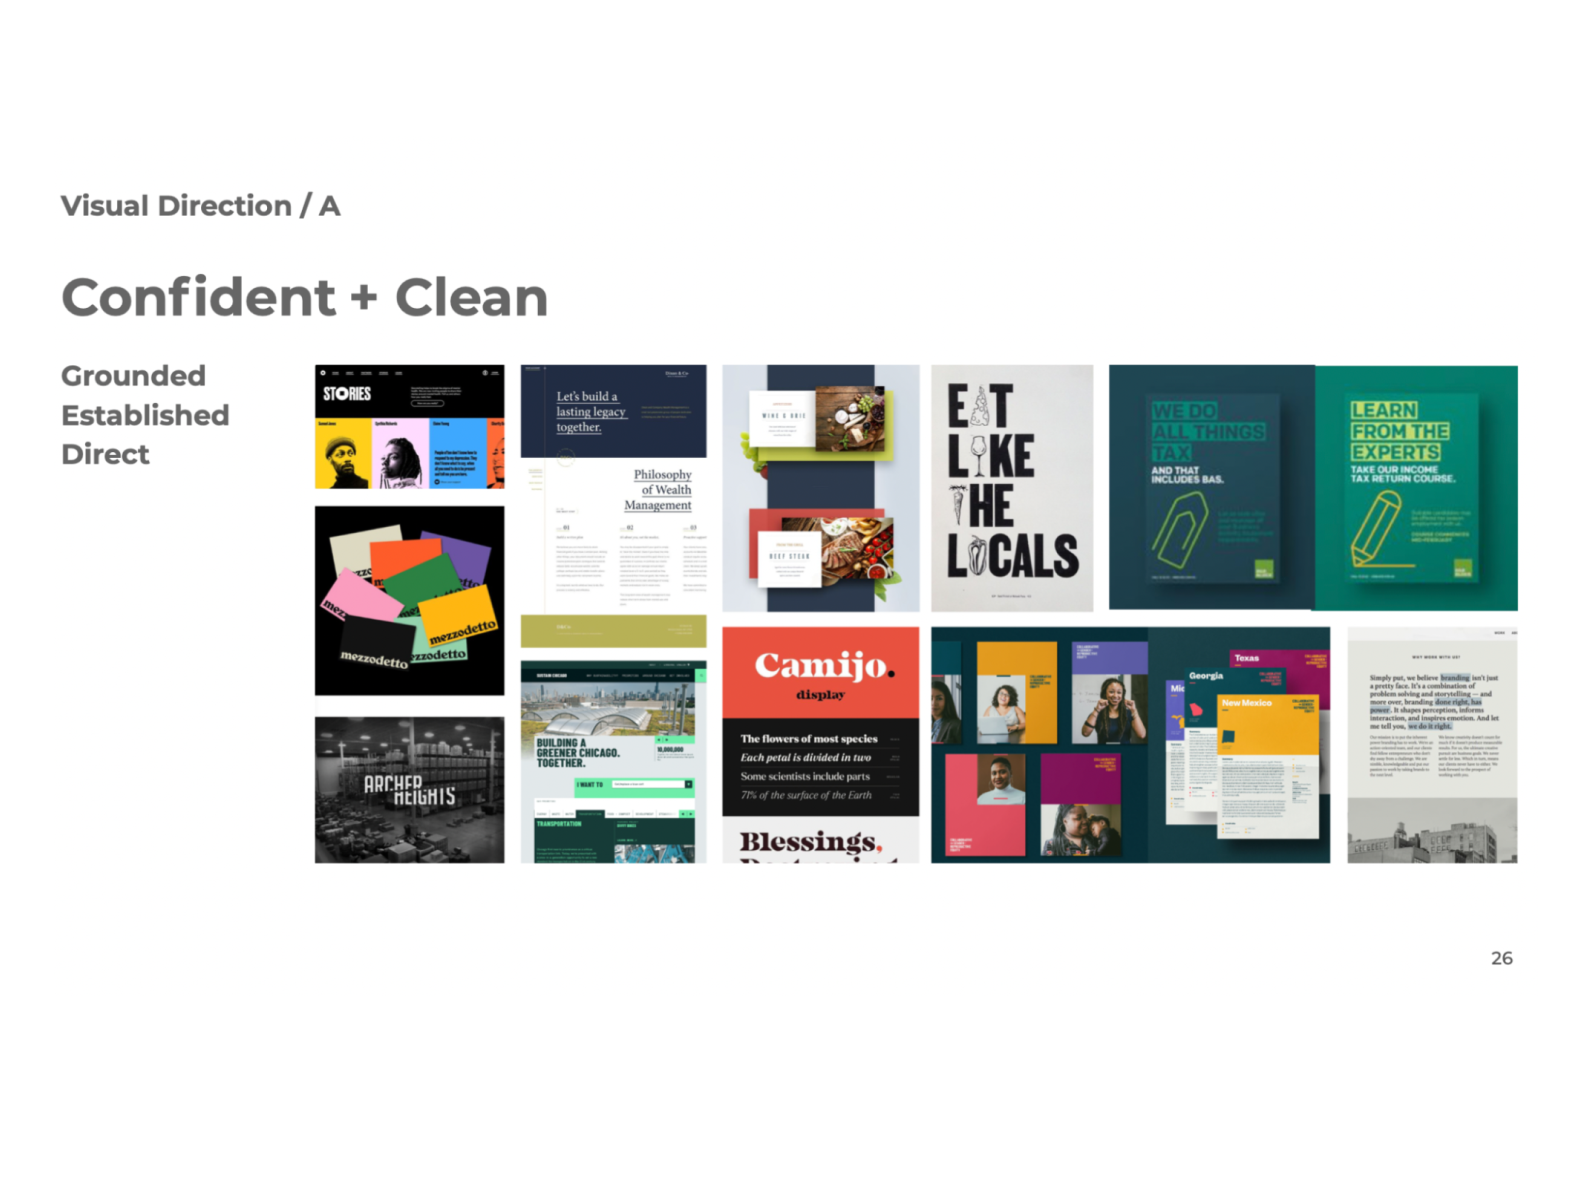 a collage of about 10 images of different graphic designs (booklets, websites) with the headline "Visual Direction A: Confident and Clean"